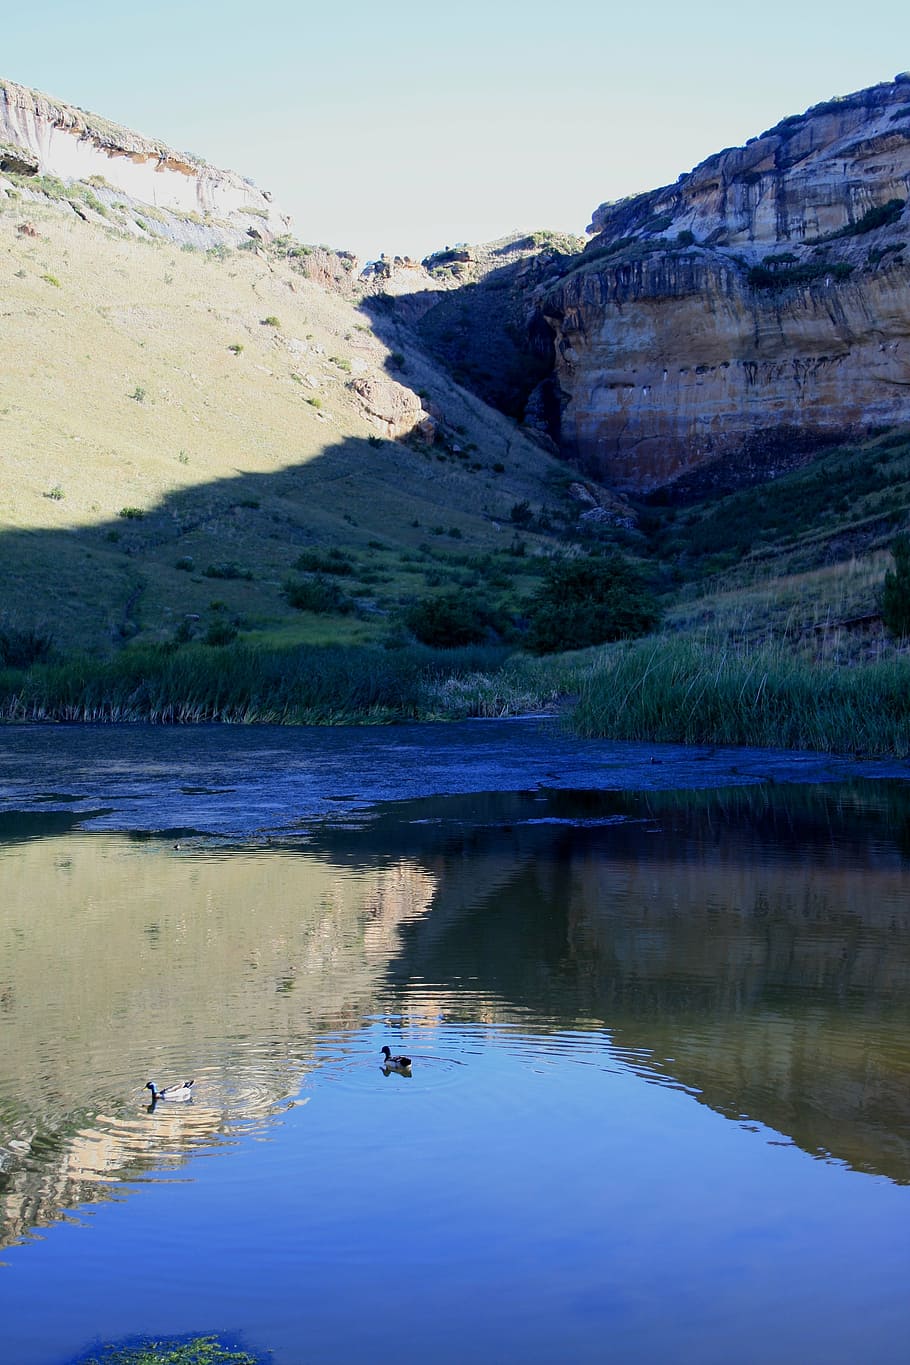 drakensberg mountains, water, landscape, scenery, natural water, reflection, blue, cleft in mountains, nature, stream